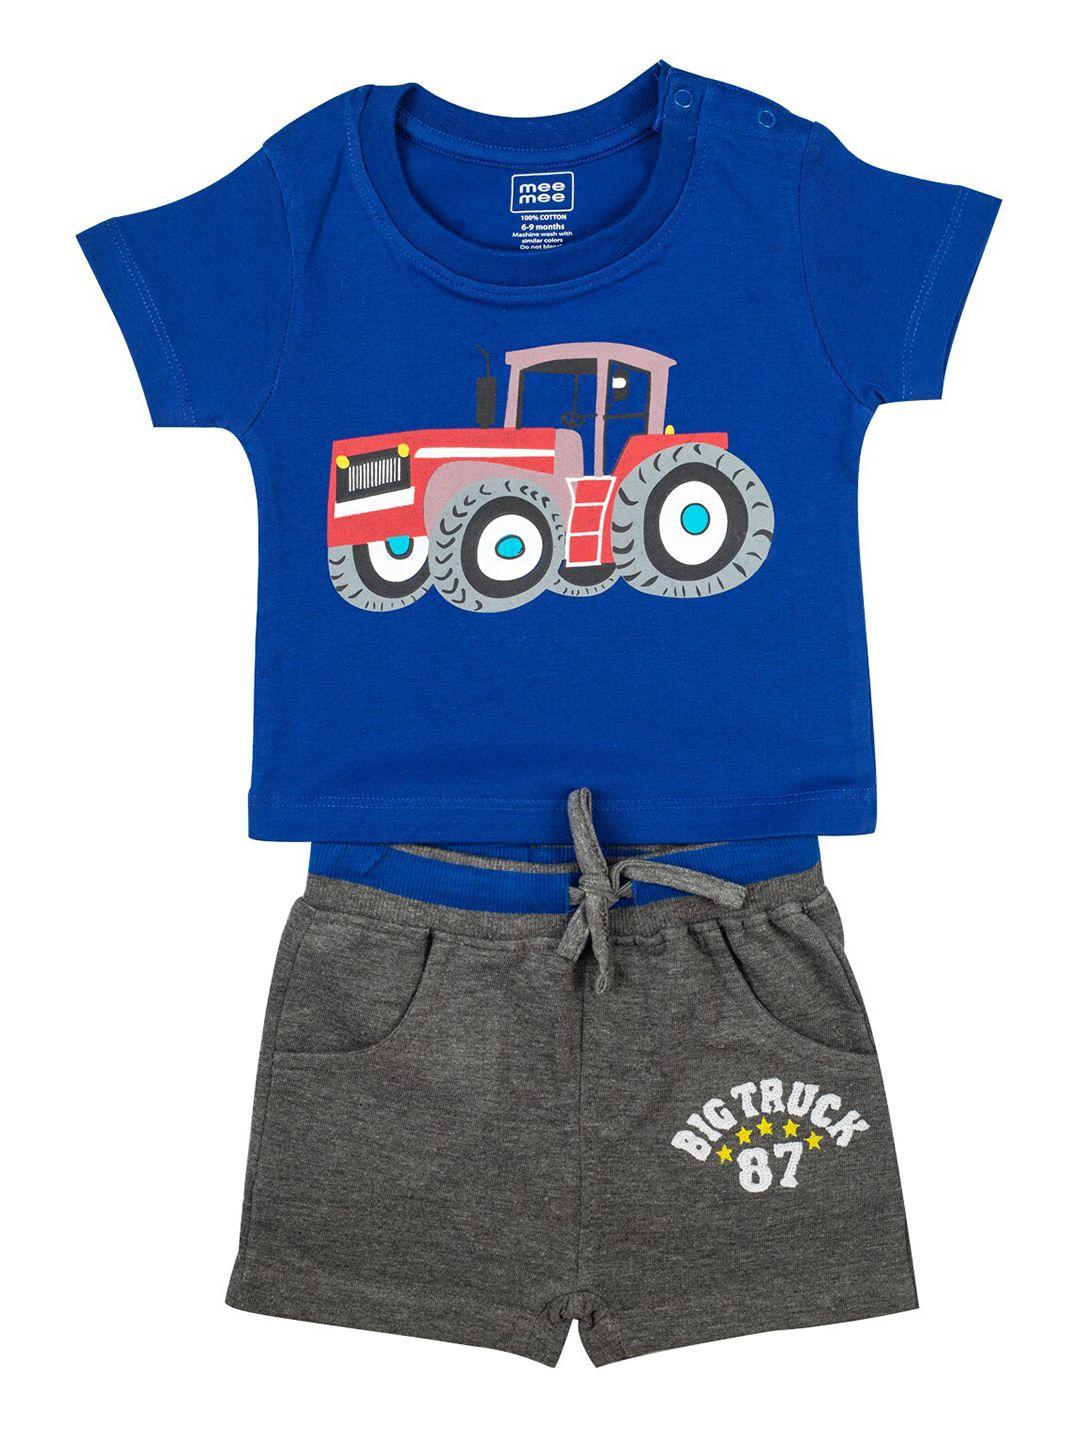 meemee boys blue & grey printed t-shirt with shorts